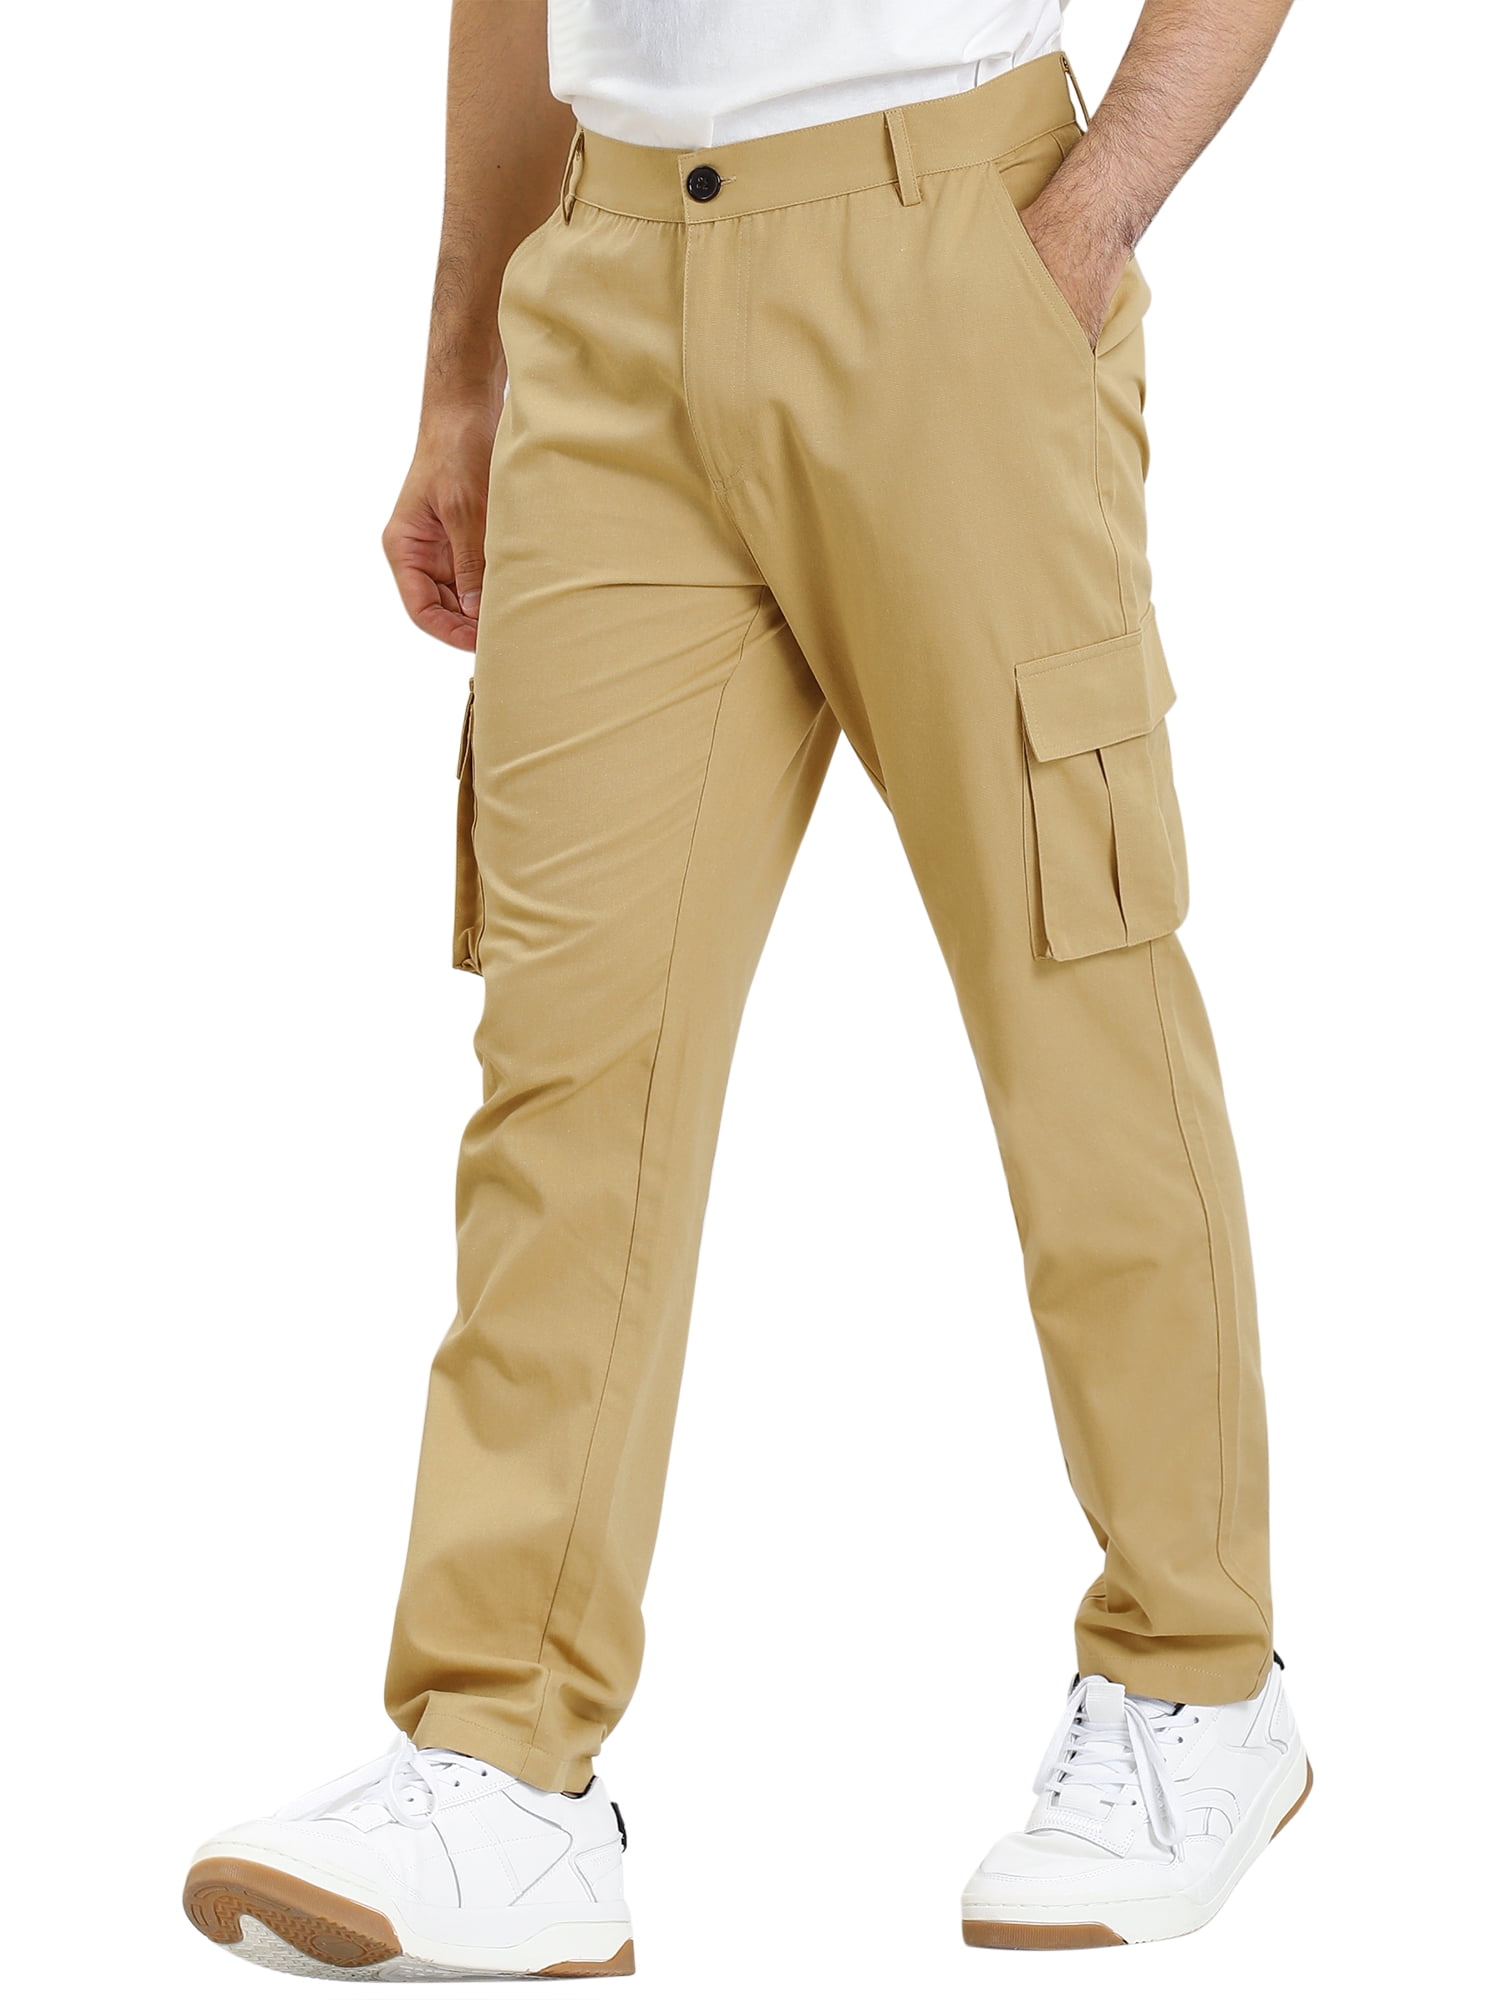 Men's Work Pants Regular Fit Jogger Casual Cargo Pants with Pockets 30 ...